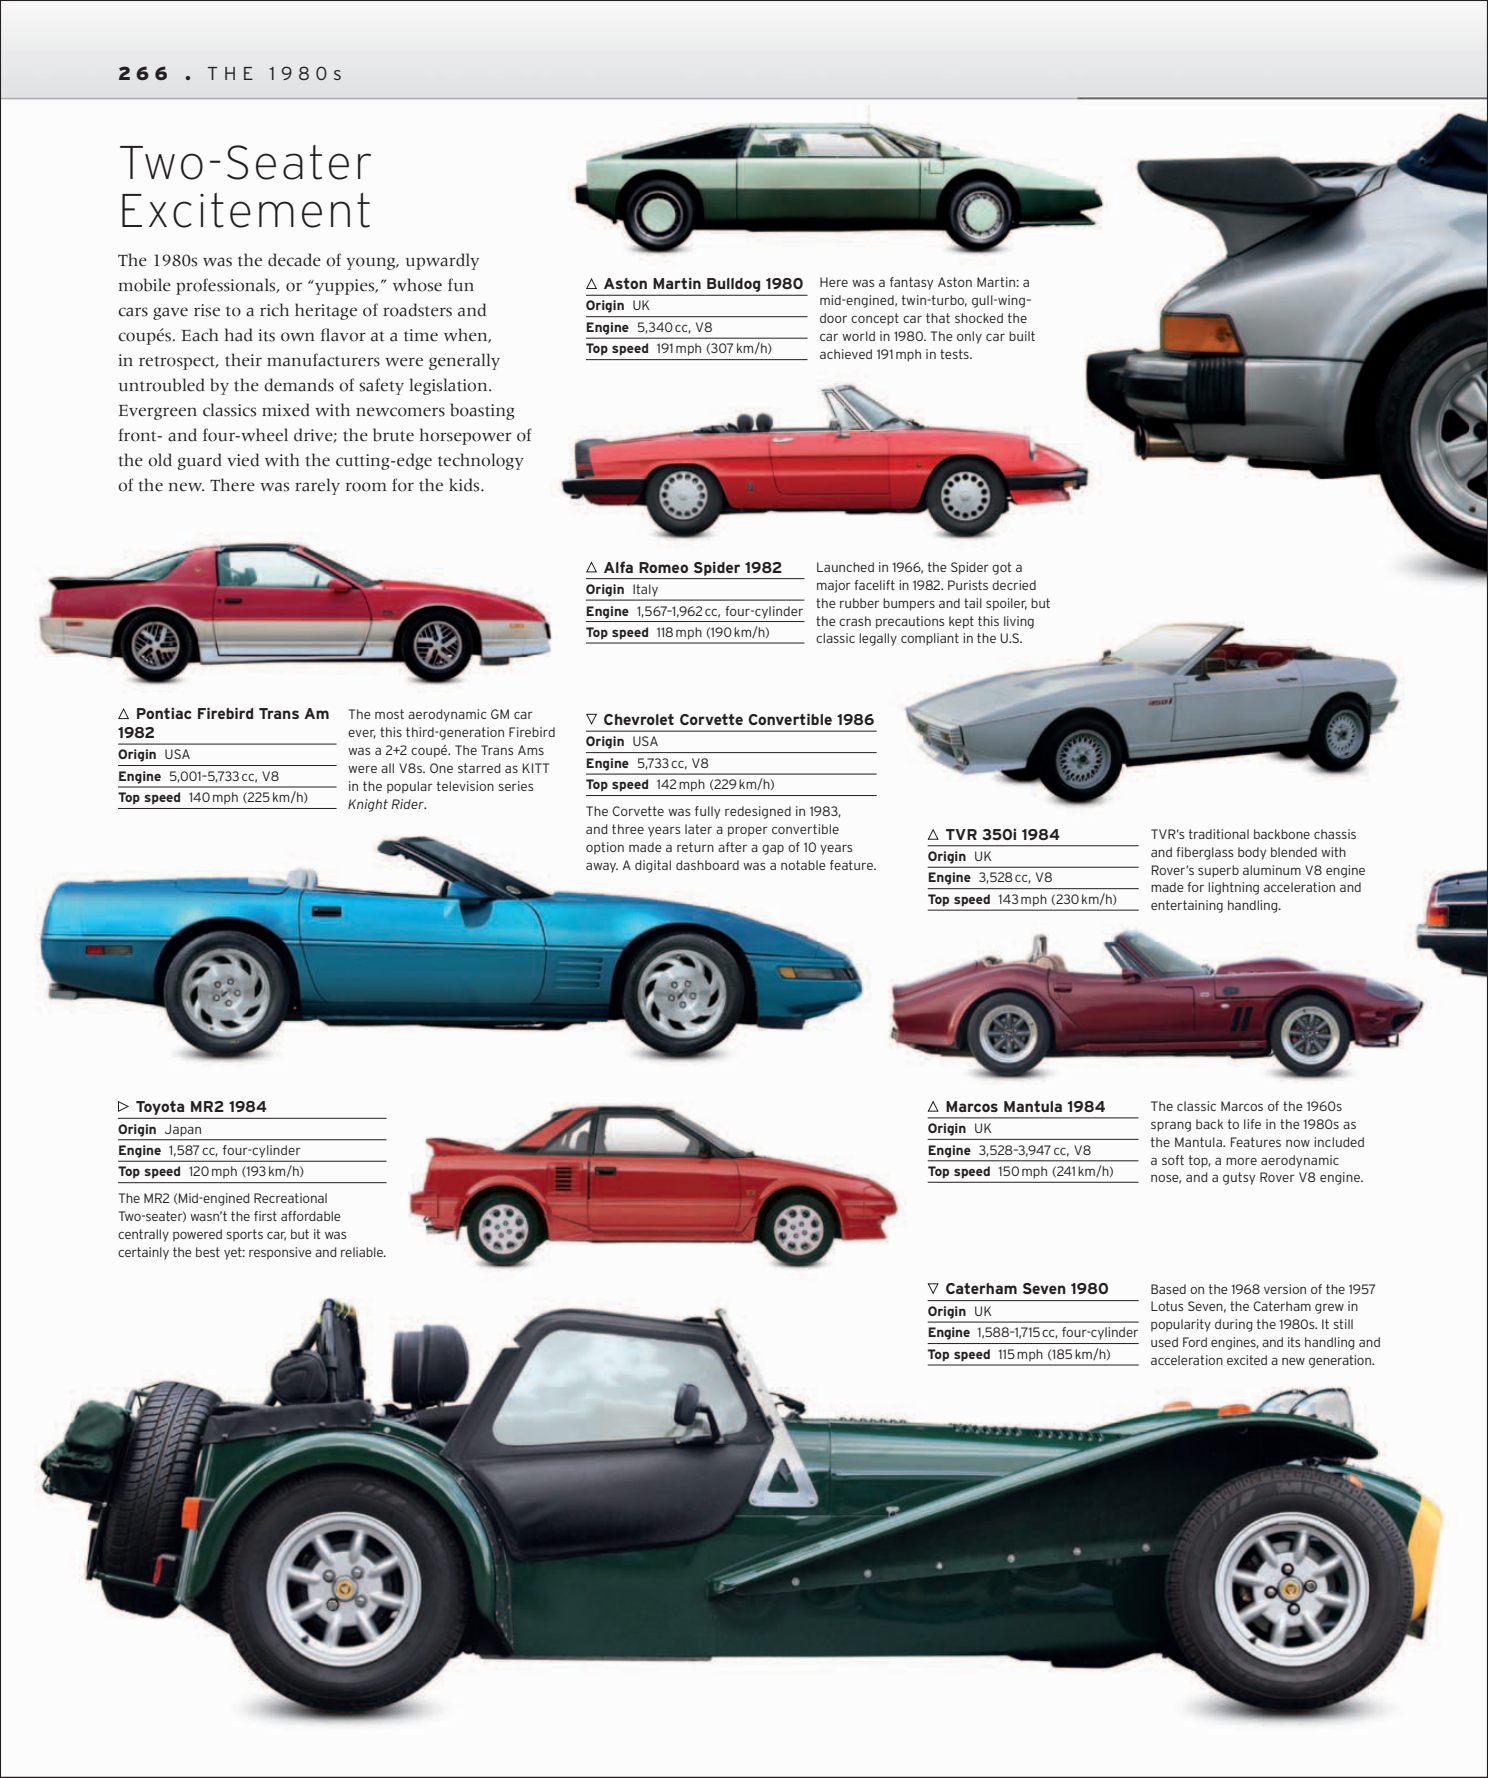 Car%20-%20The%20Definitive%20Visual%20History%20of%20the%20Automobile_268.png